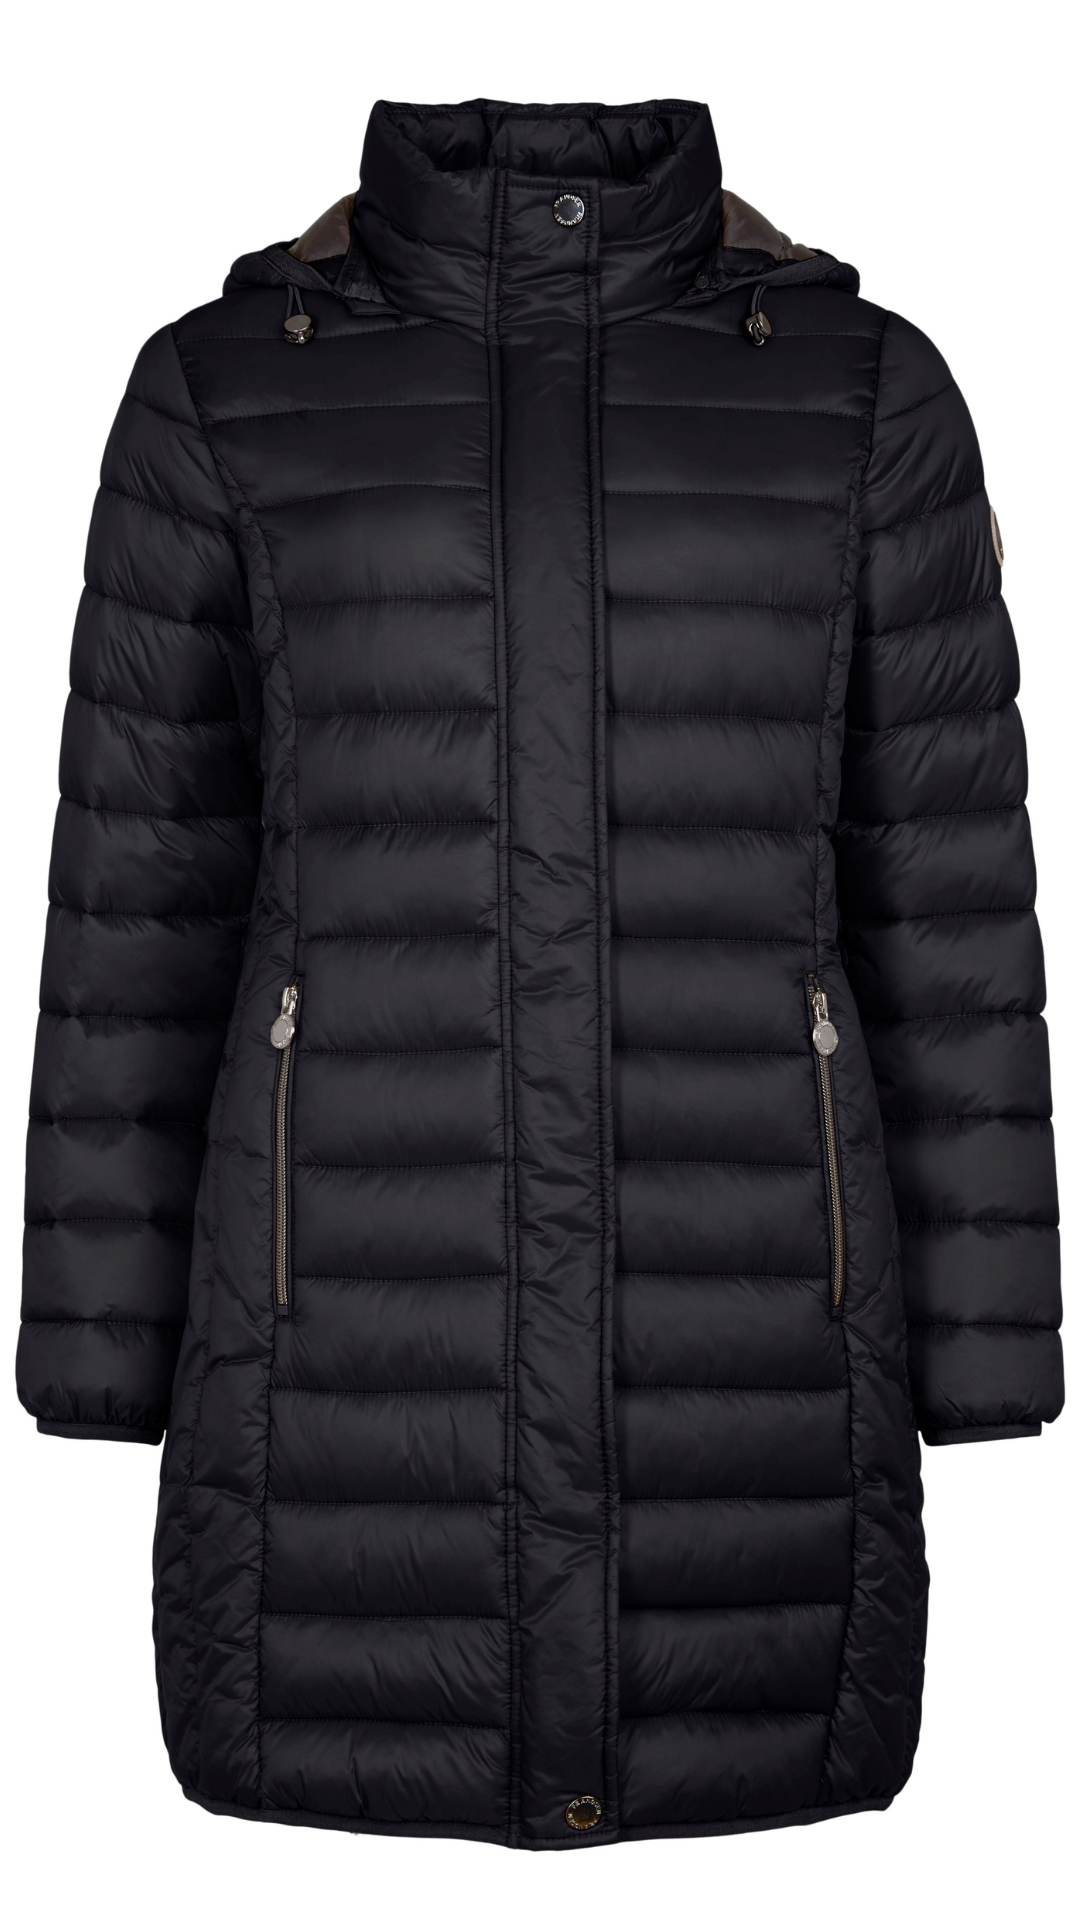 Lightweight 3/4 Length Quilted Puffer Outerwear. Style FR527